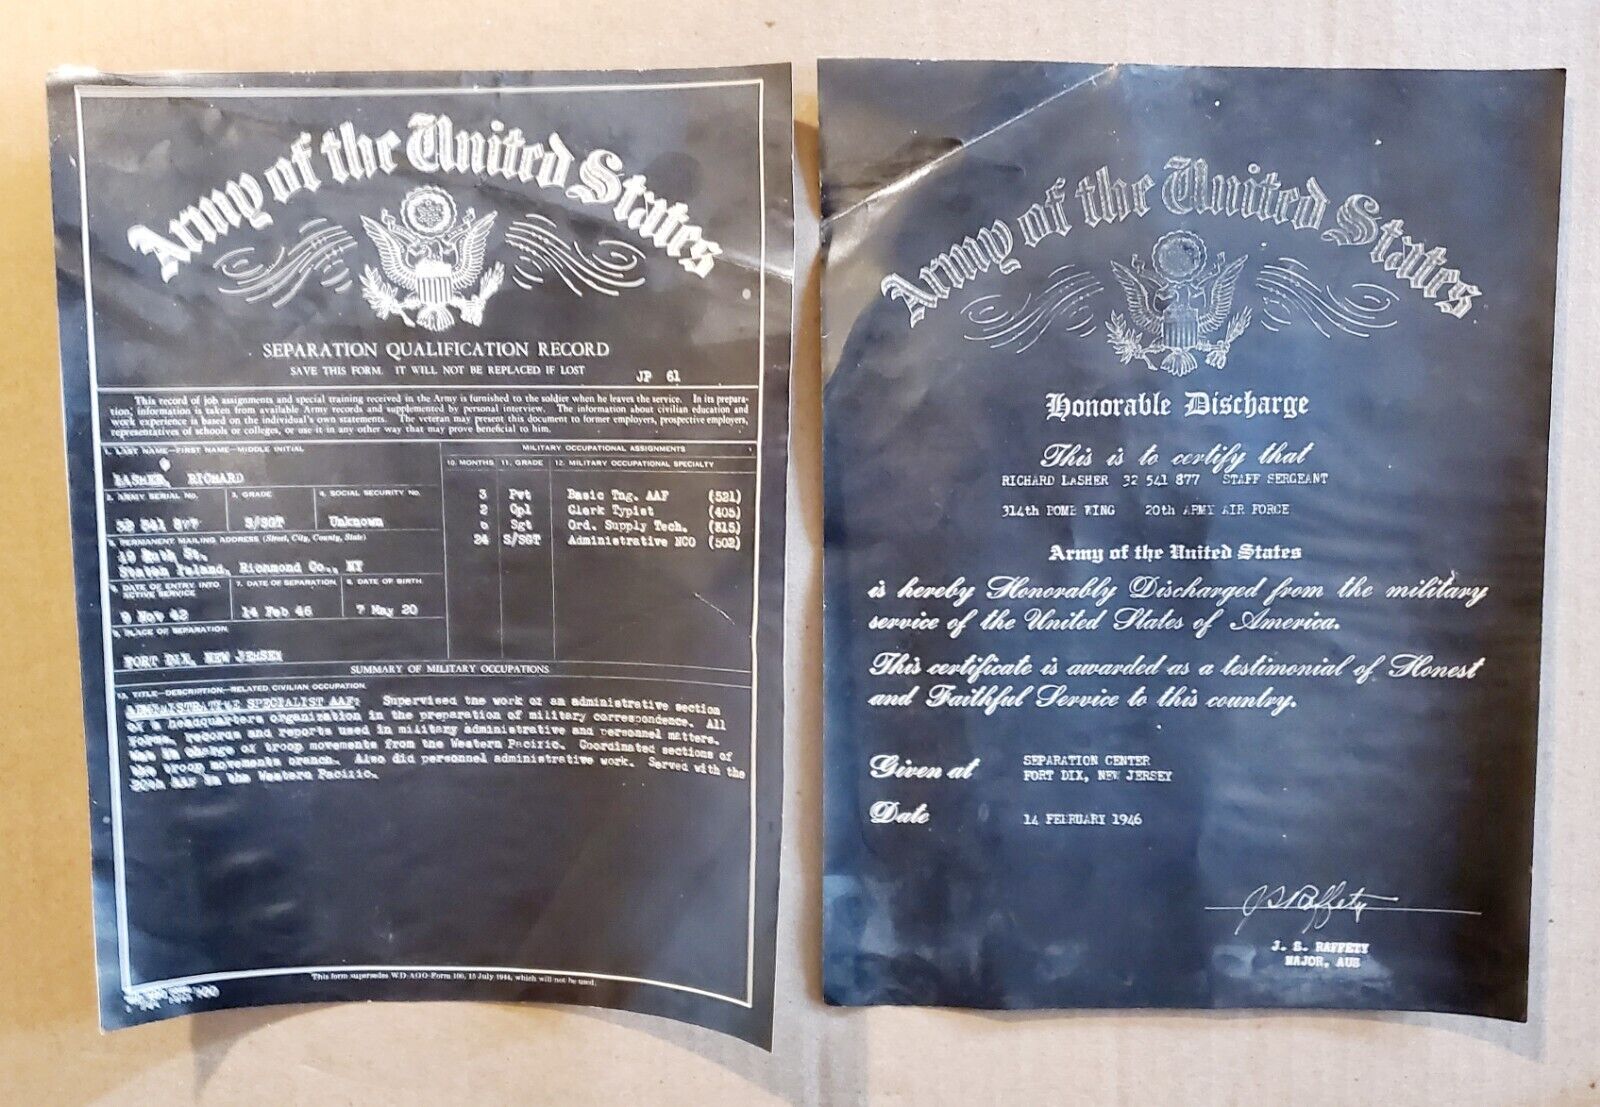 1942 Separtion Qualification Record And Honorable Discharge Papers 1942 - 46